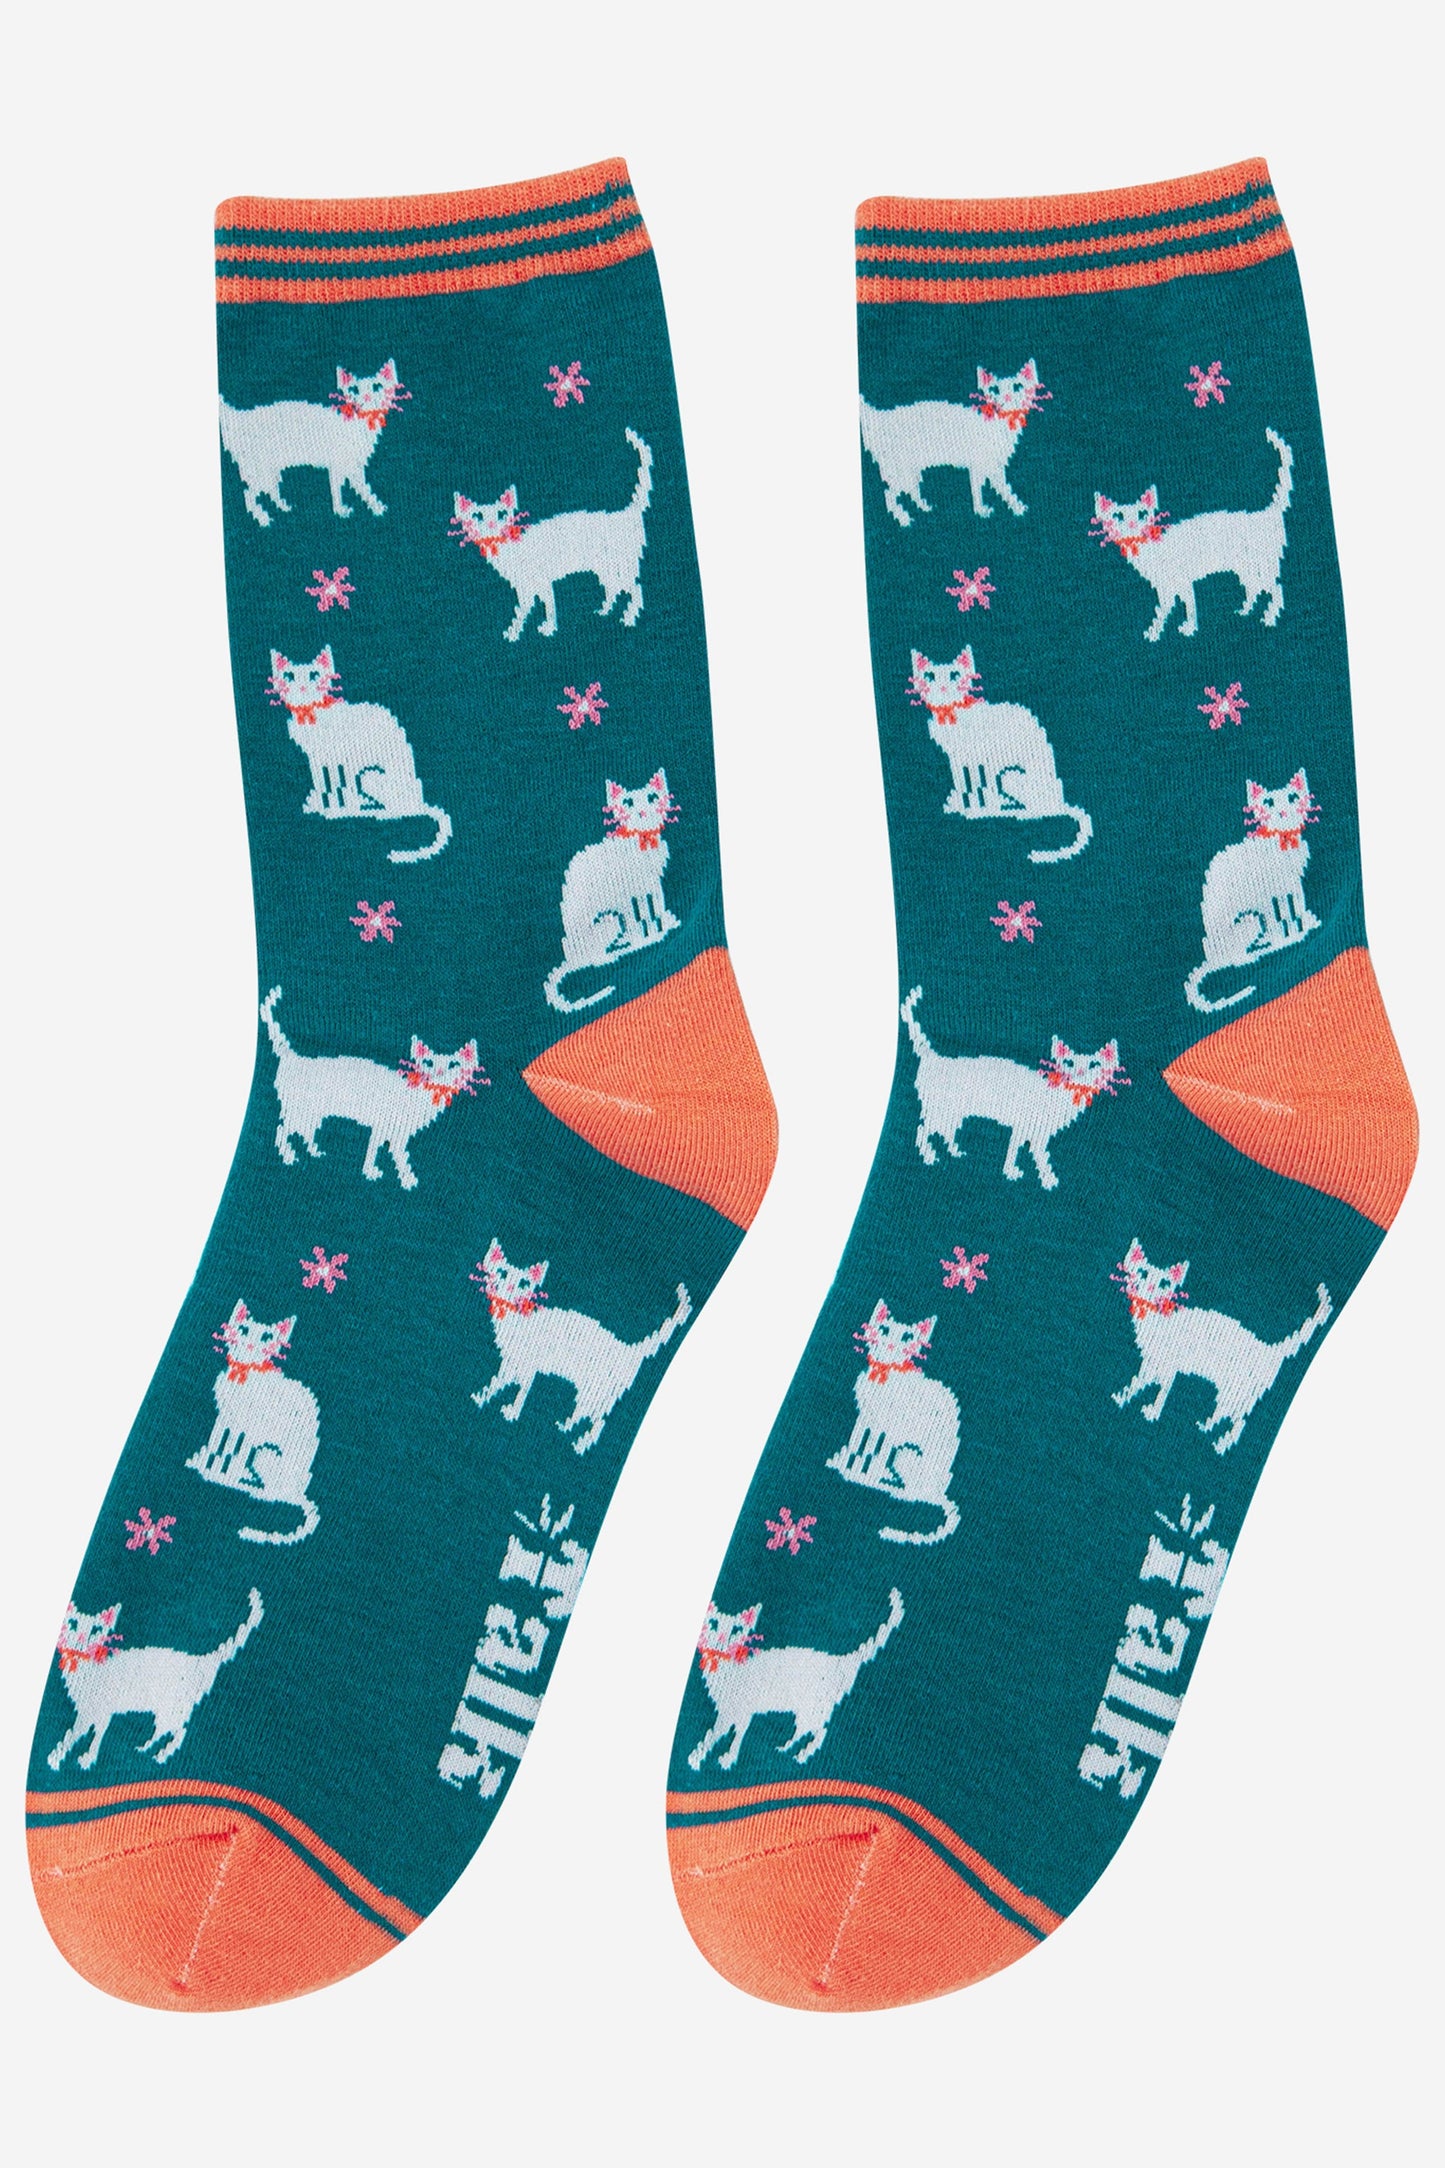 teal ankle socks with an pattern of white cats and pink flowers